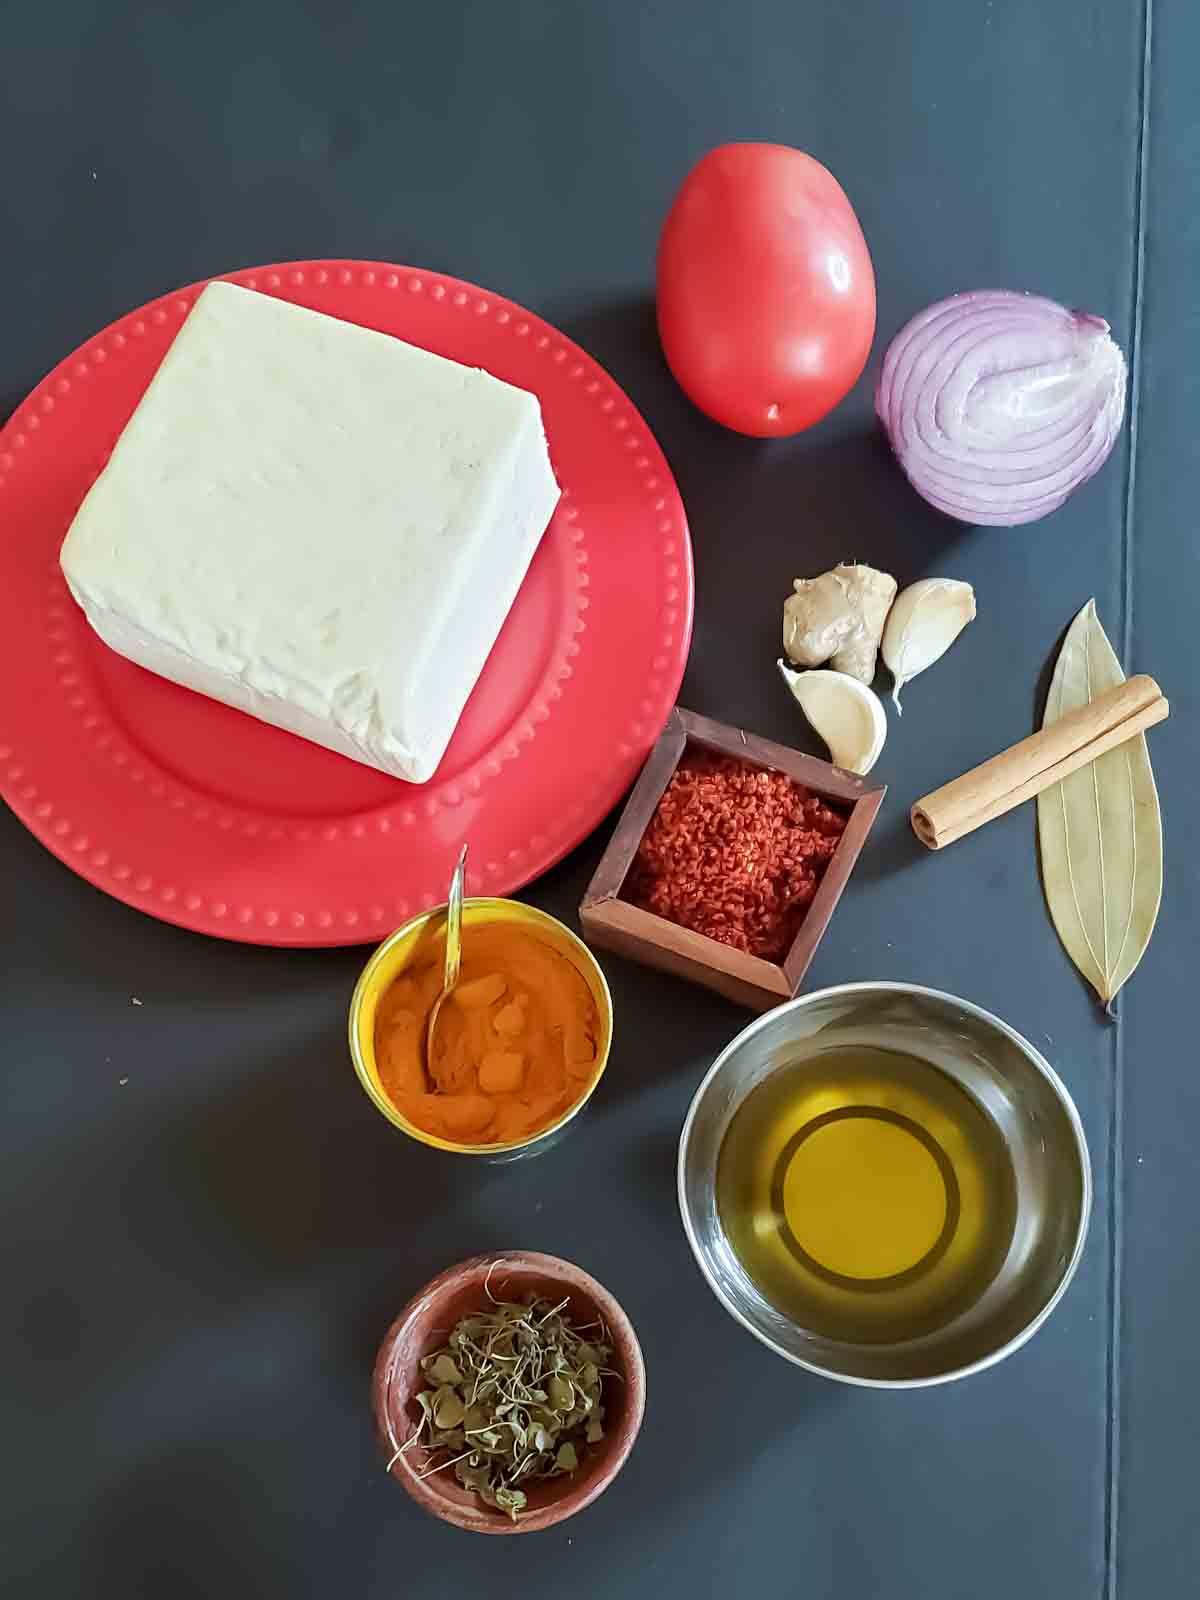 Main Ingredients used in making this recipe.